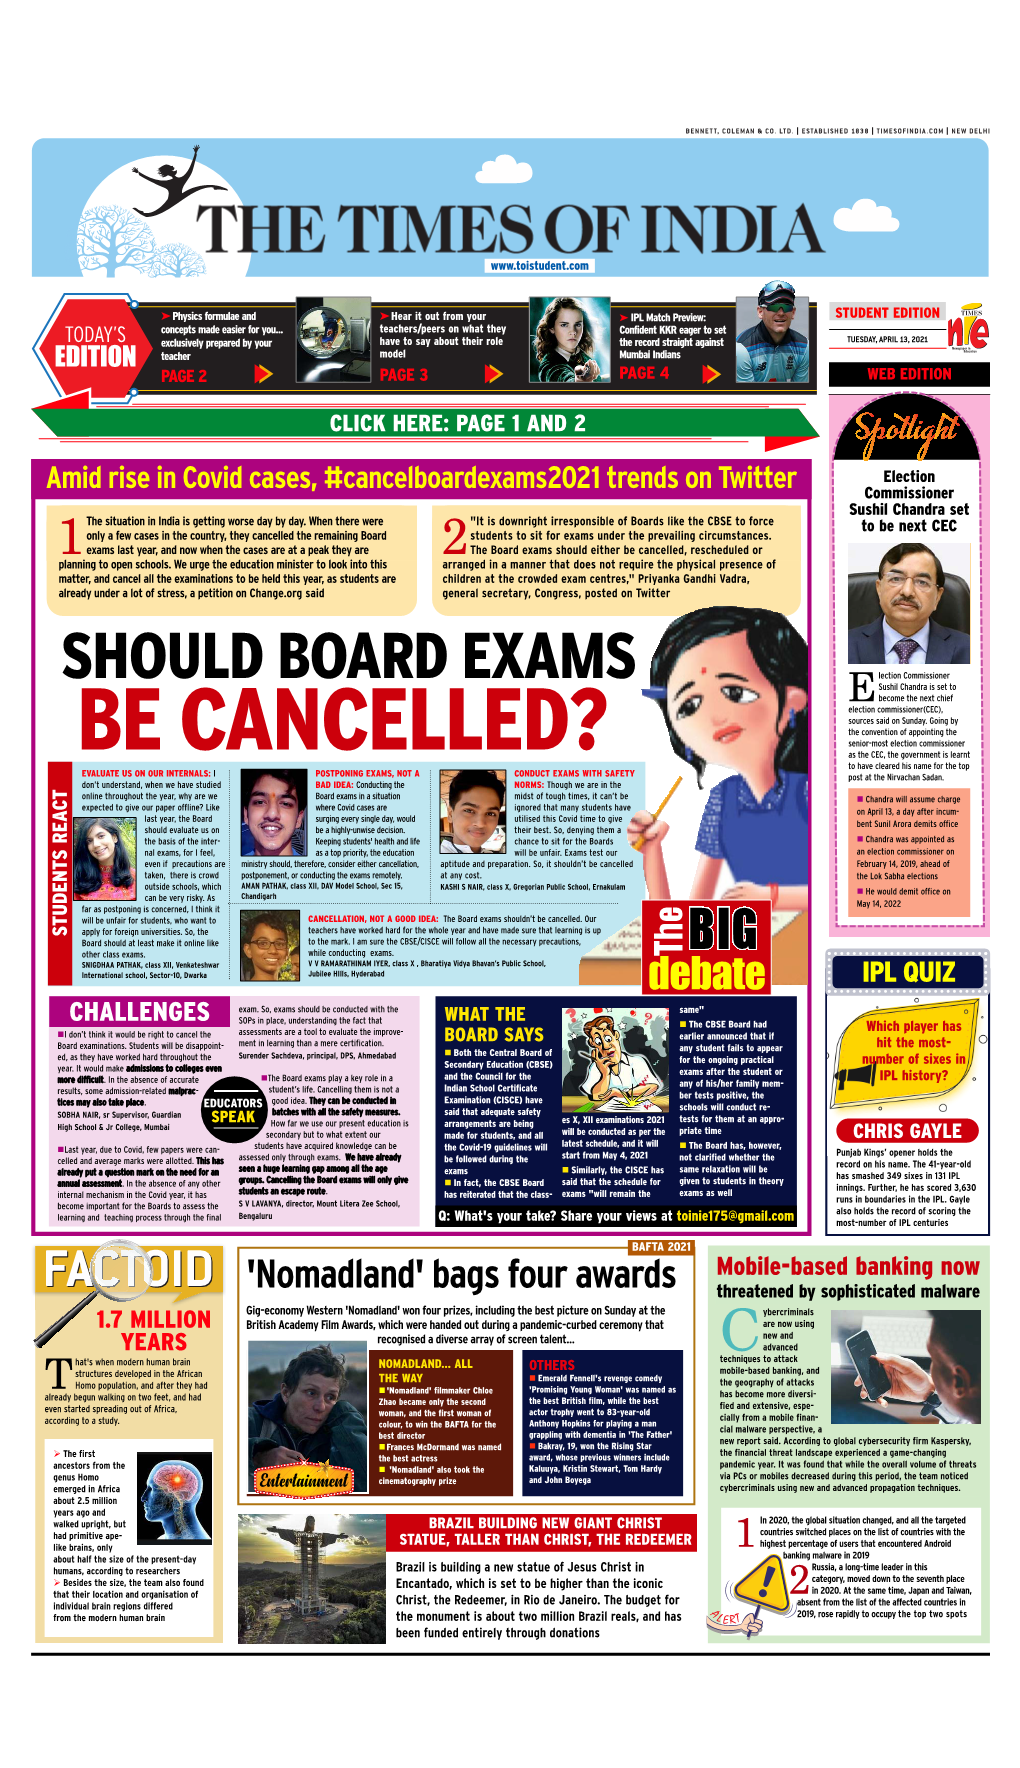 SHOULD BOARD EXAMS Lection Commissioner Sushil Chandra Is Set to E Become the Next Chief Election Commissioner(CEC), Sources Said on Sunday